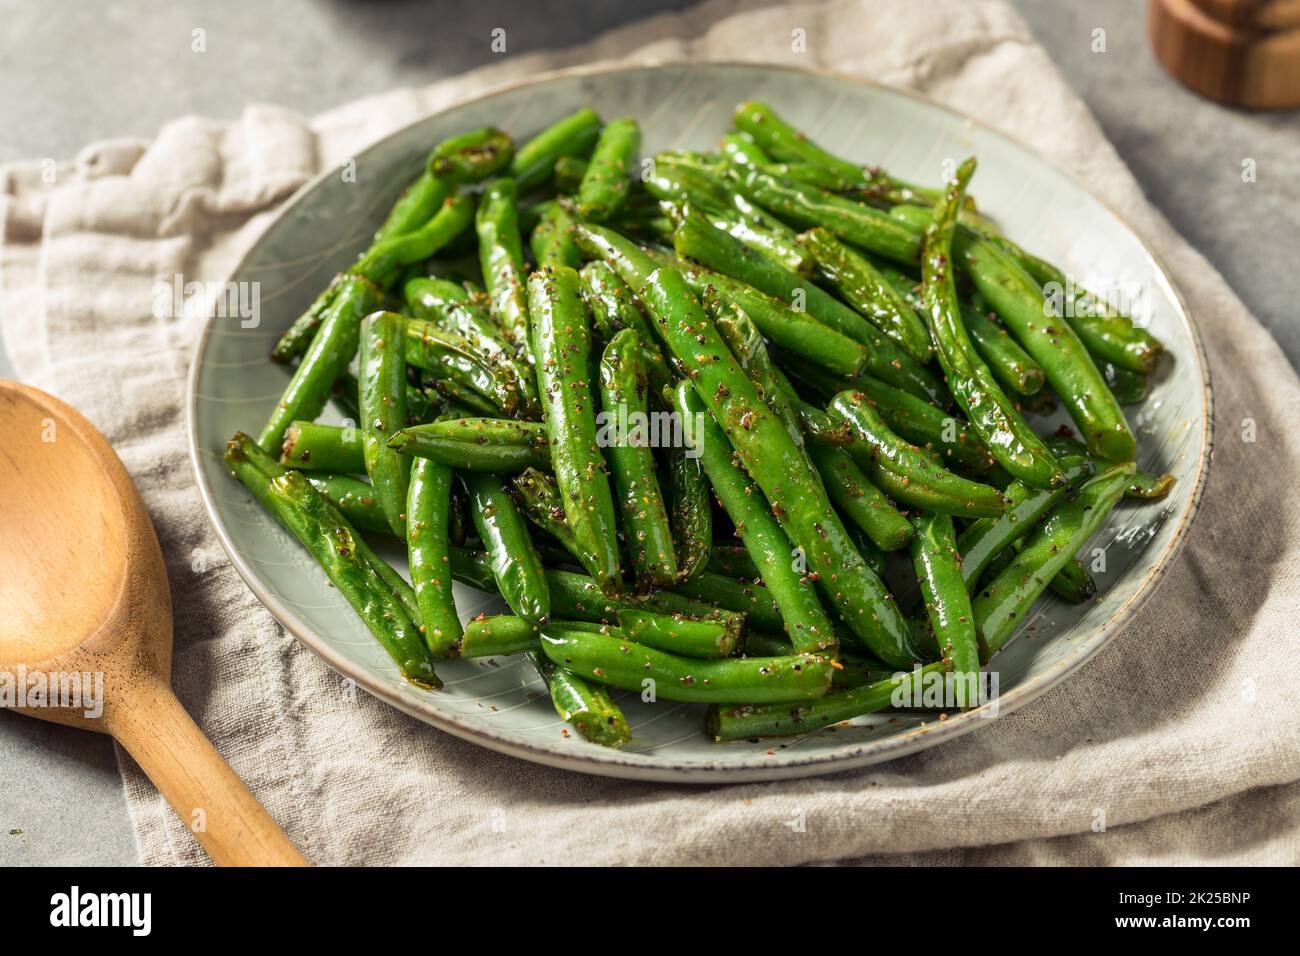 Homemade Sauteed Green Beans with Salt and Pepper Stock Photo